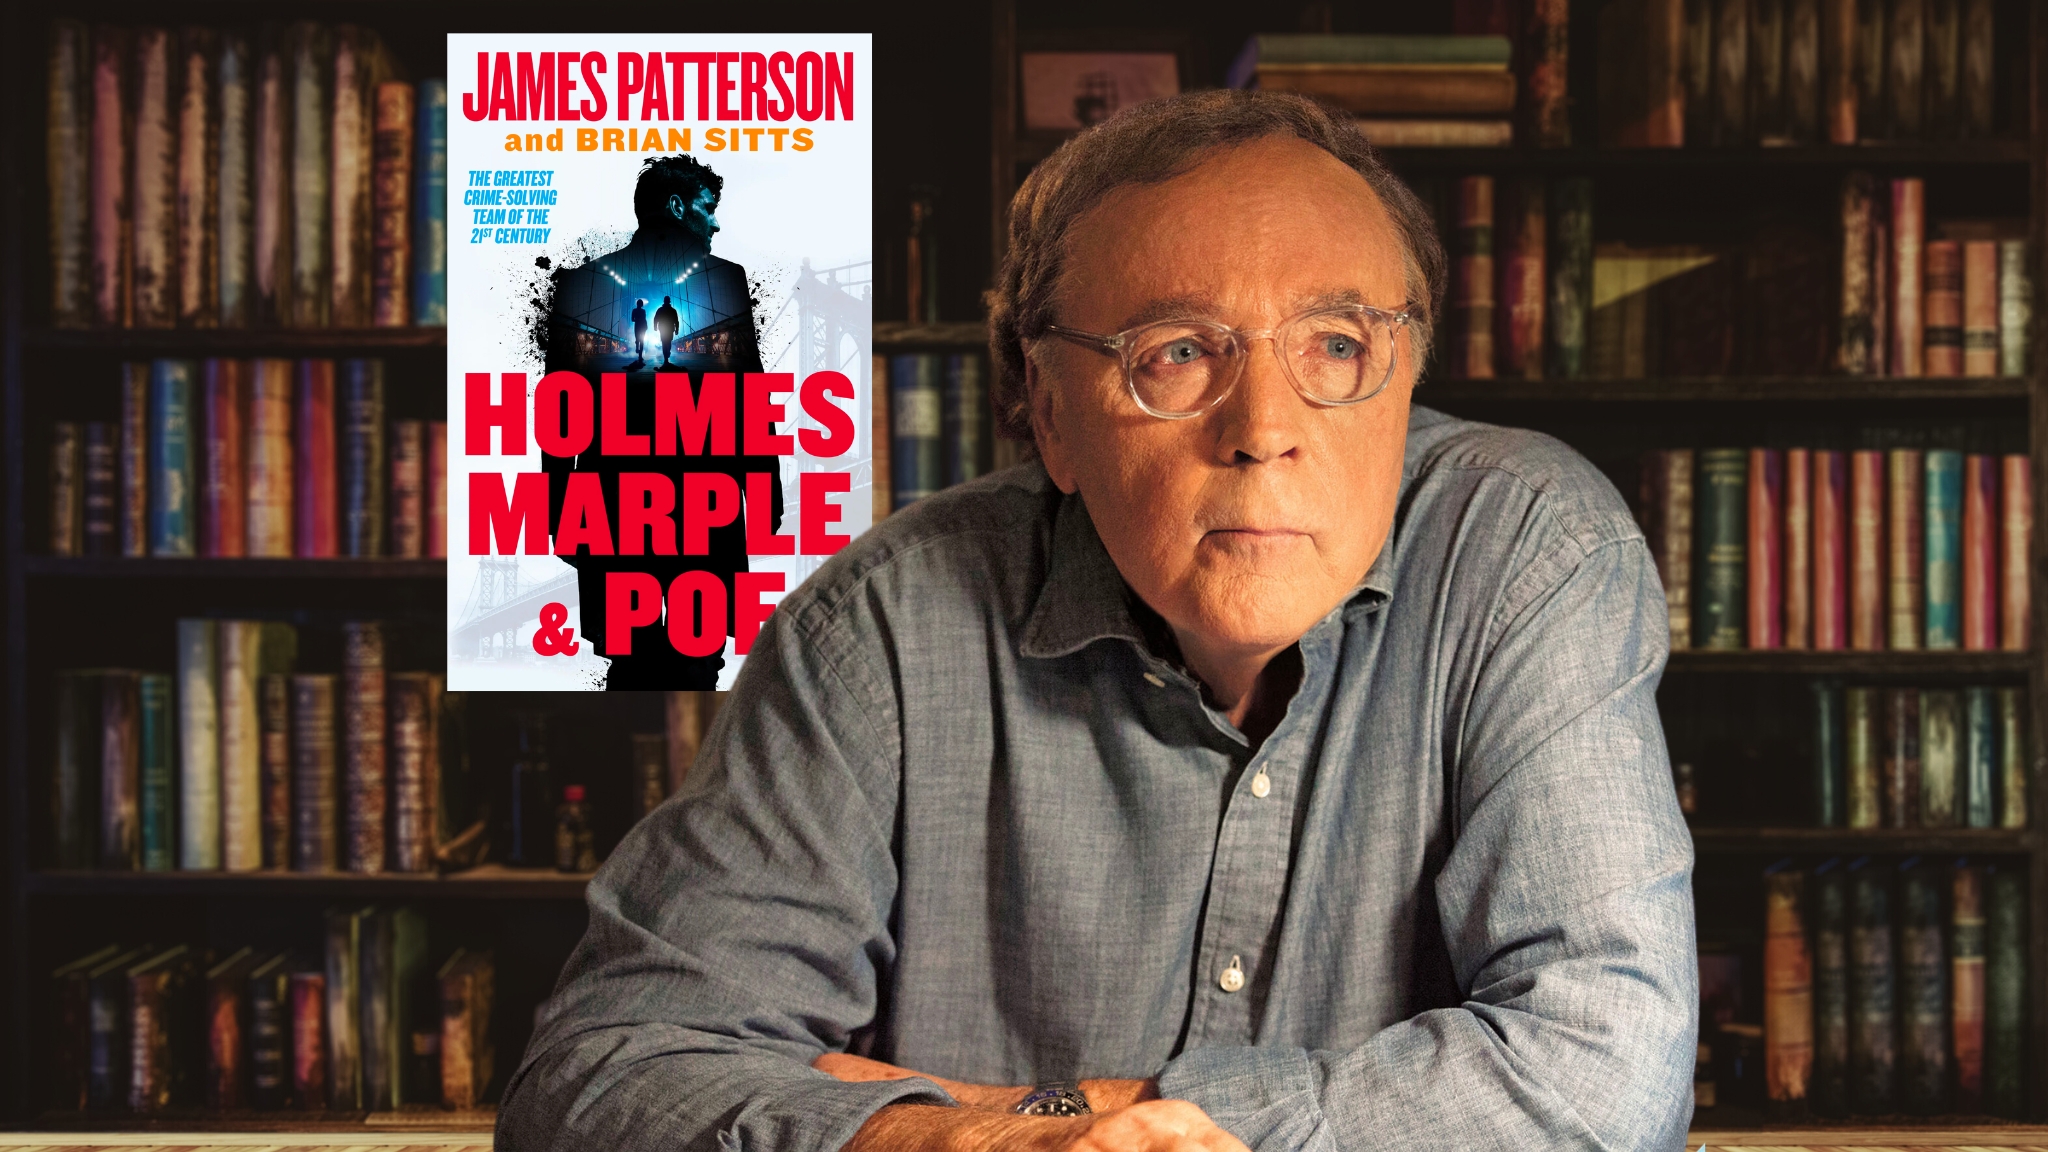 Holmes, Marple & Poe by Author James Patterson